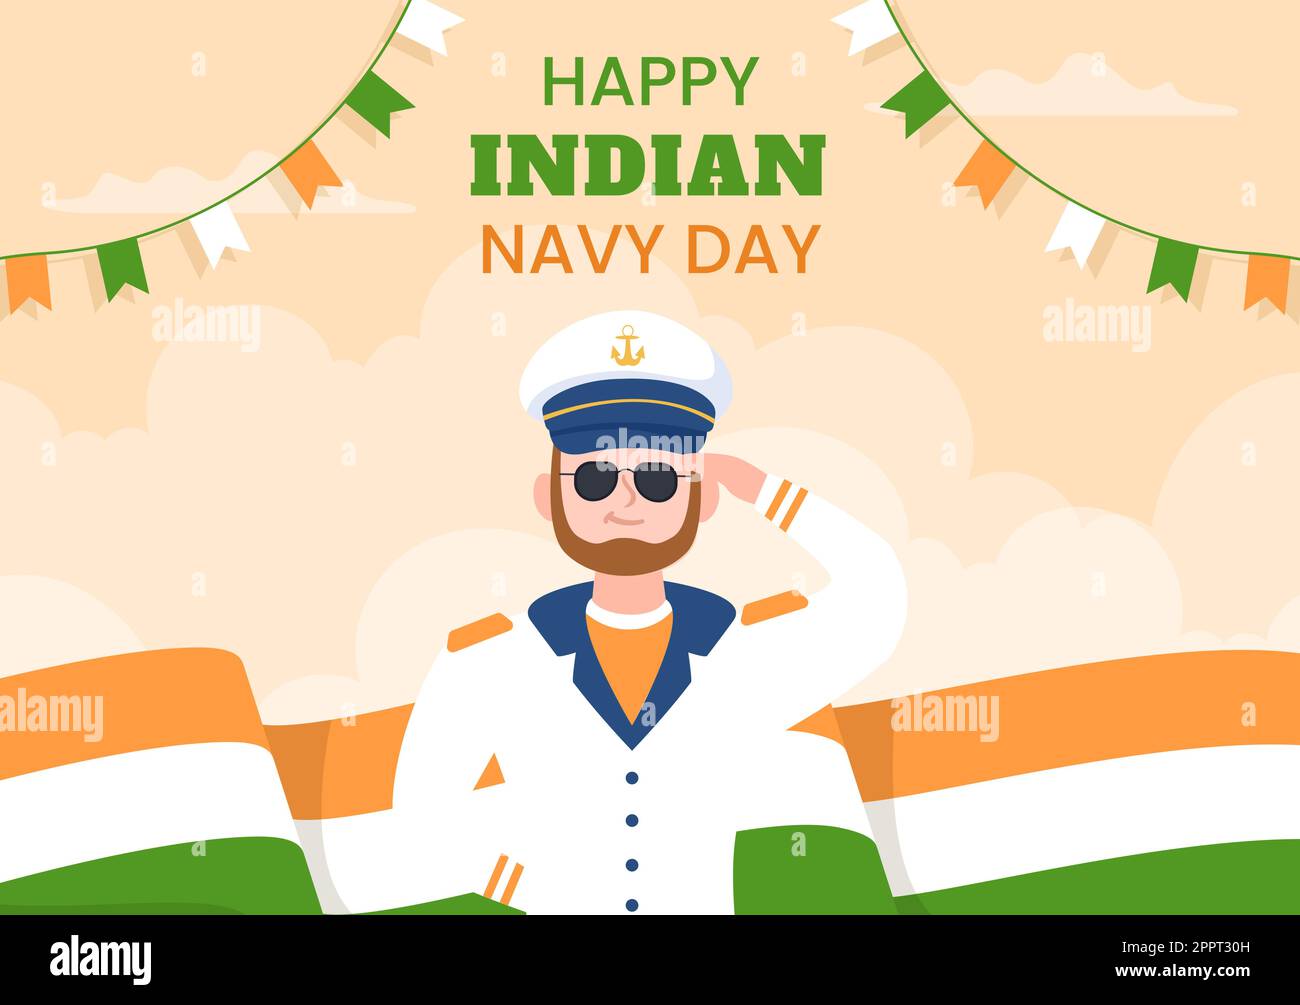 Indian Navy Day Background Template Hand Drawn Cartoon Flat Illustration Stock Vector